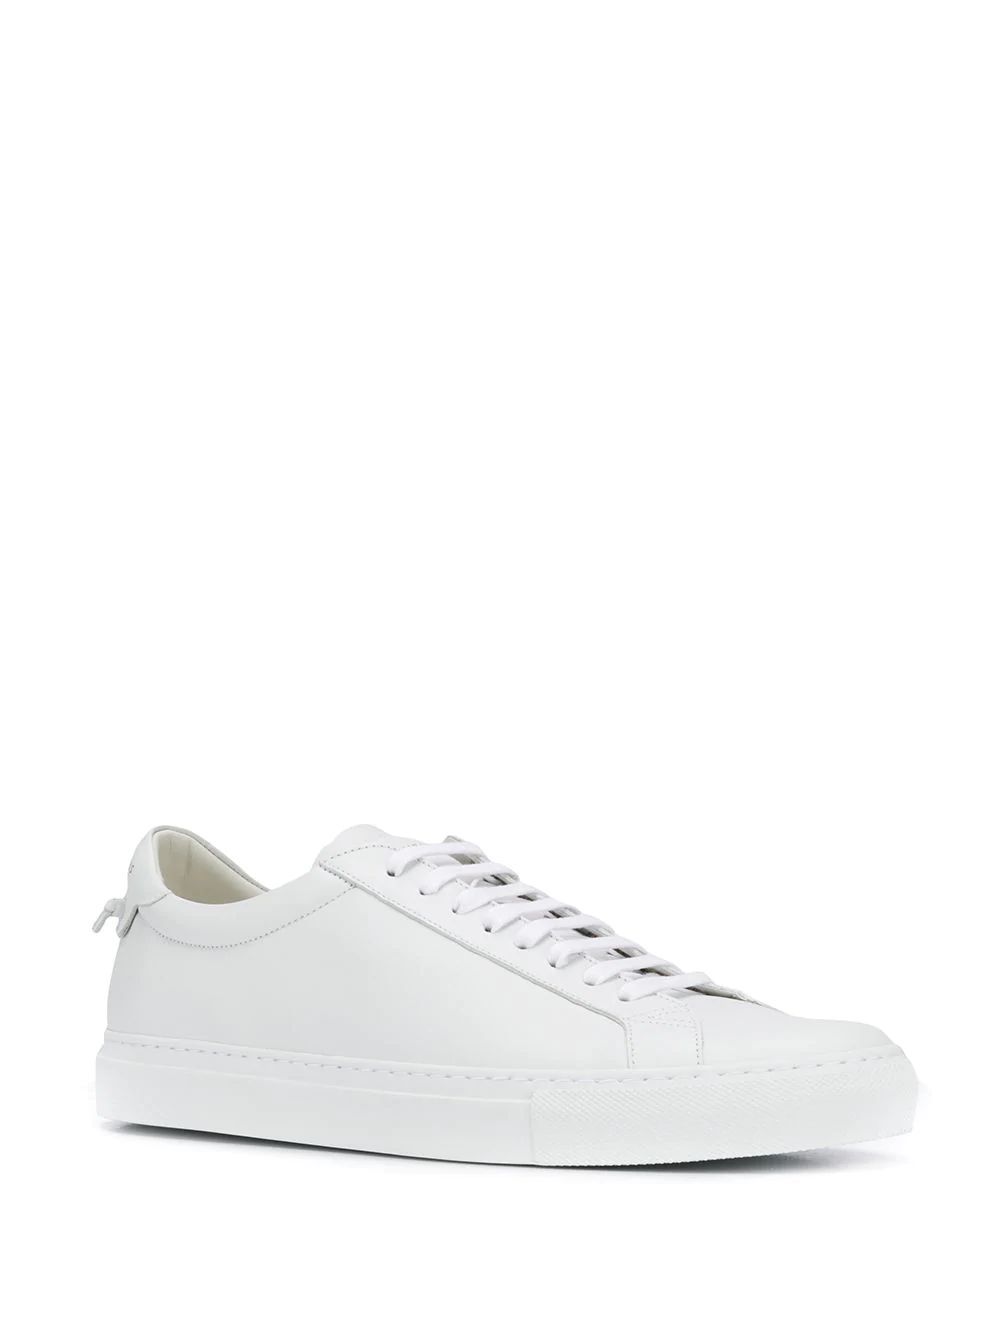 Givenchy Men's BH0002H0Ft100 White Leather Sneakers